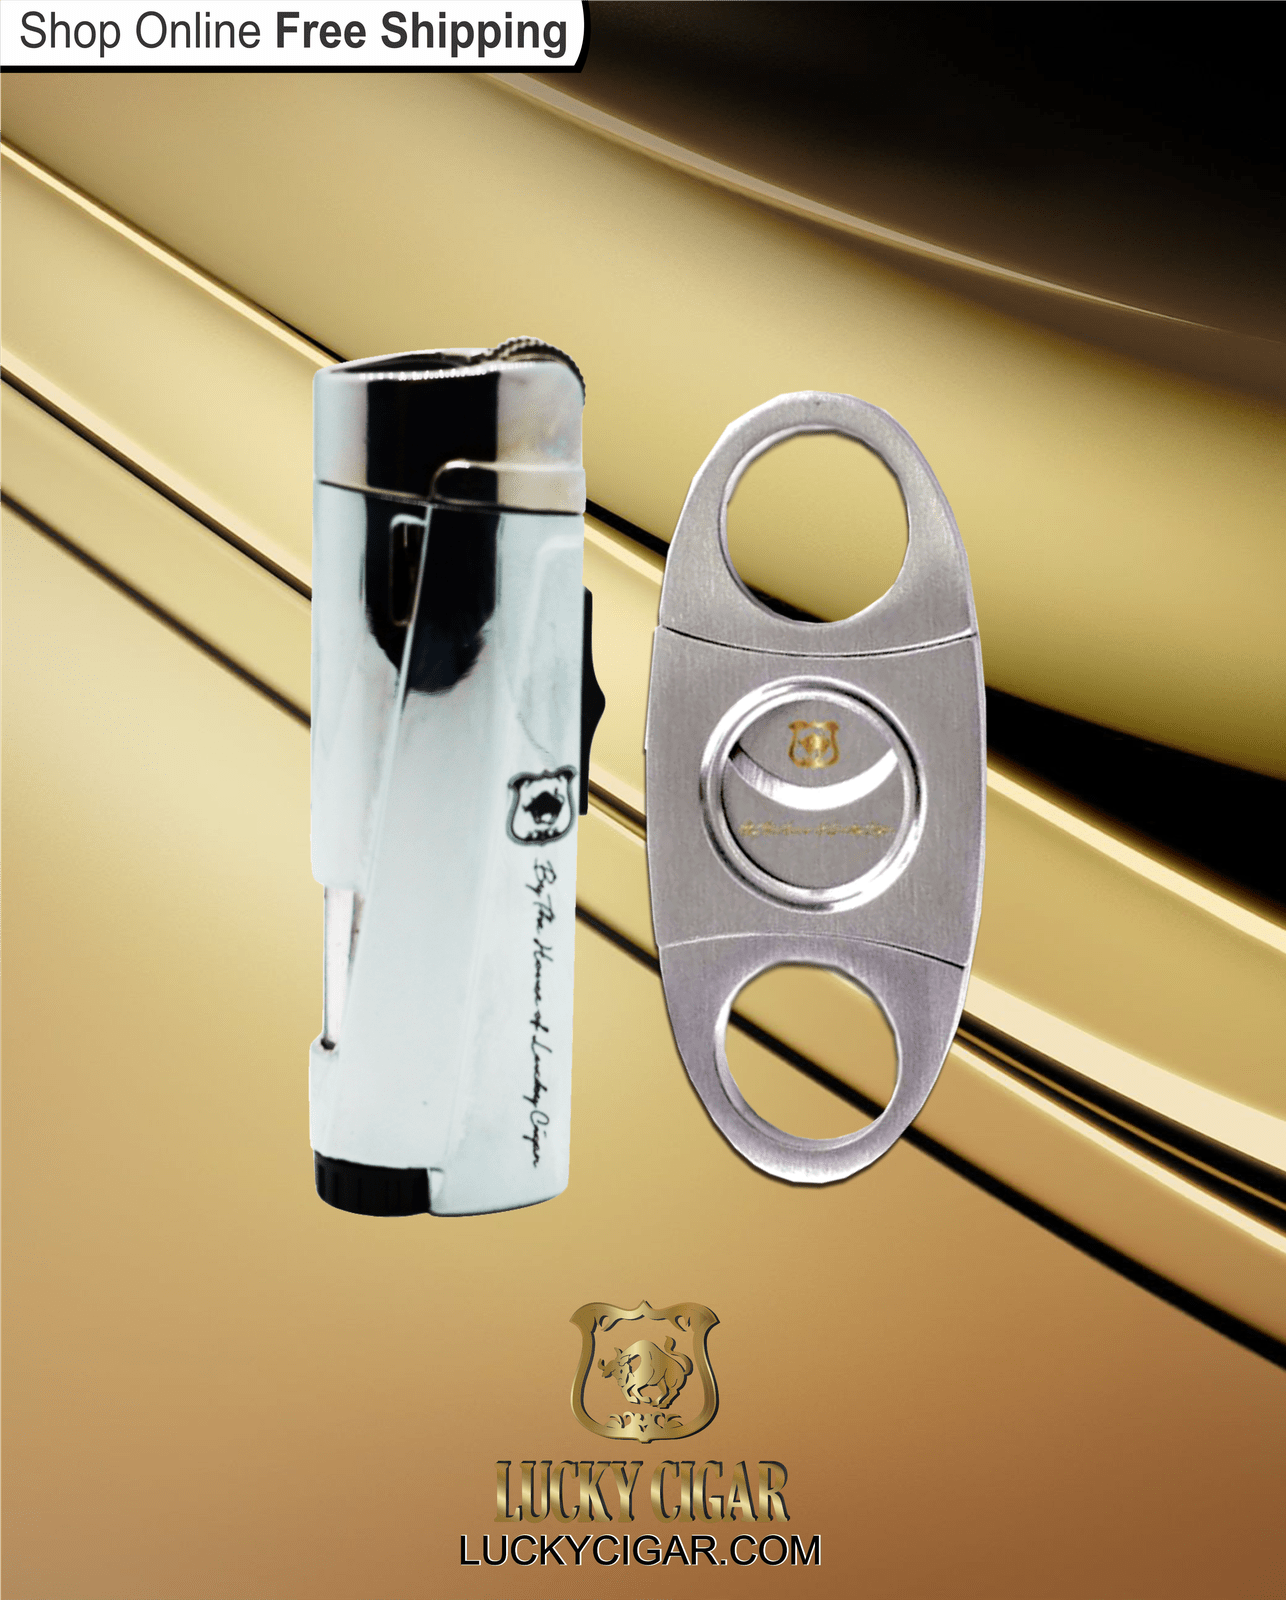 Cigar Lifestyle Accessories: Set of Torch, Cutter in Chrome